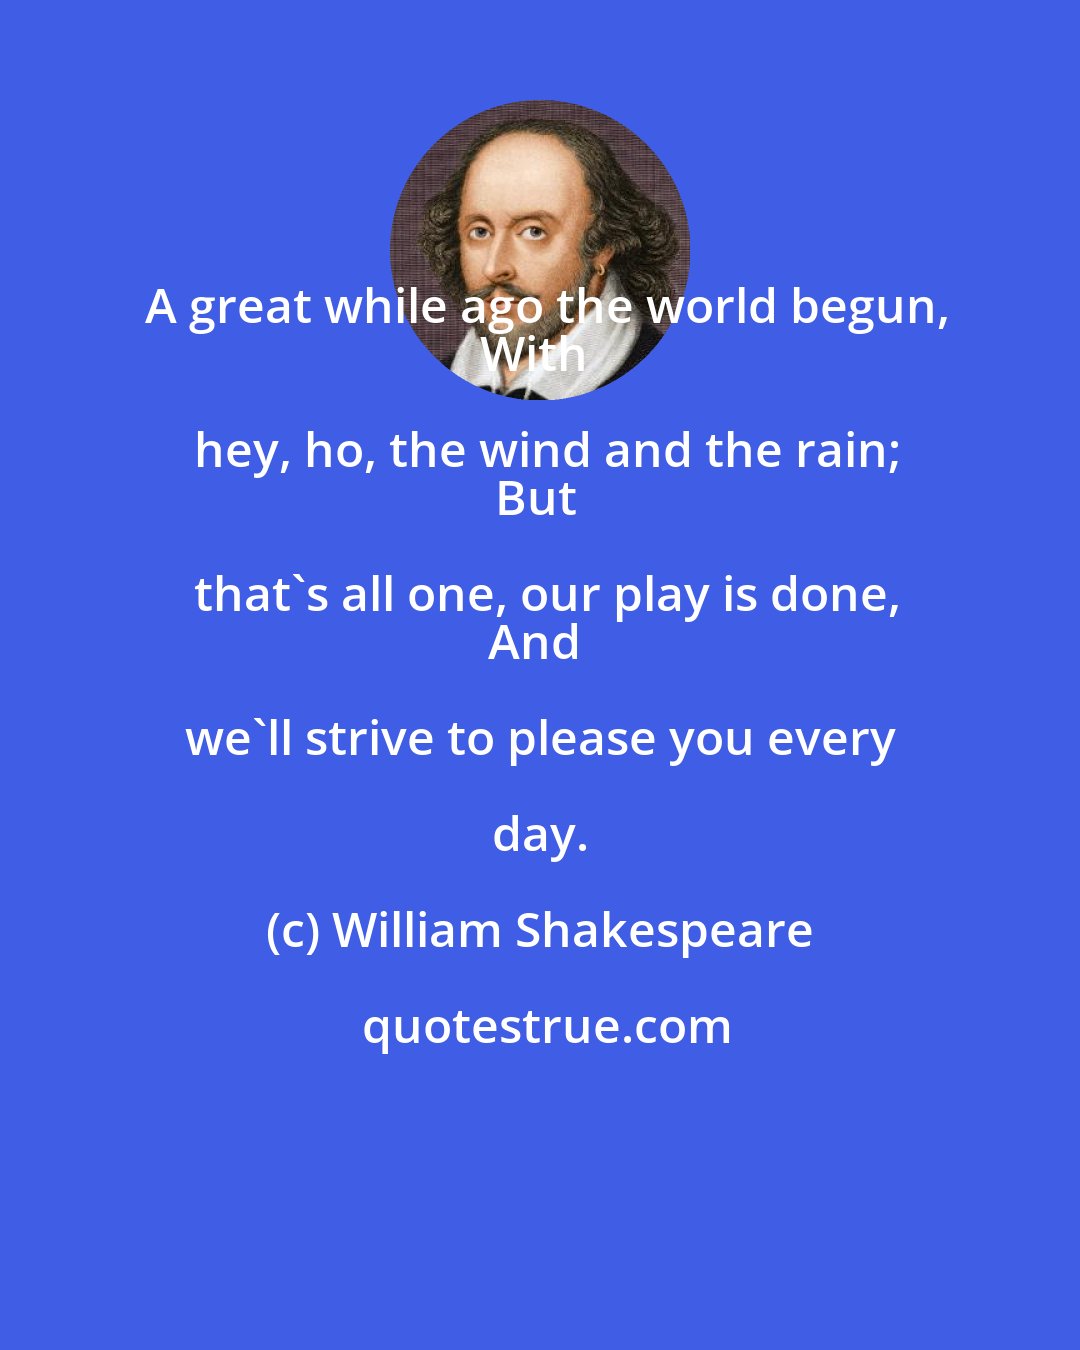 William Shakespeare: A great while ago the world begun,
With hey, ho, the wind and the rain;
But that's all one, our play is done,
And we'll strive to please you every day.